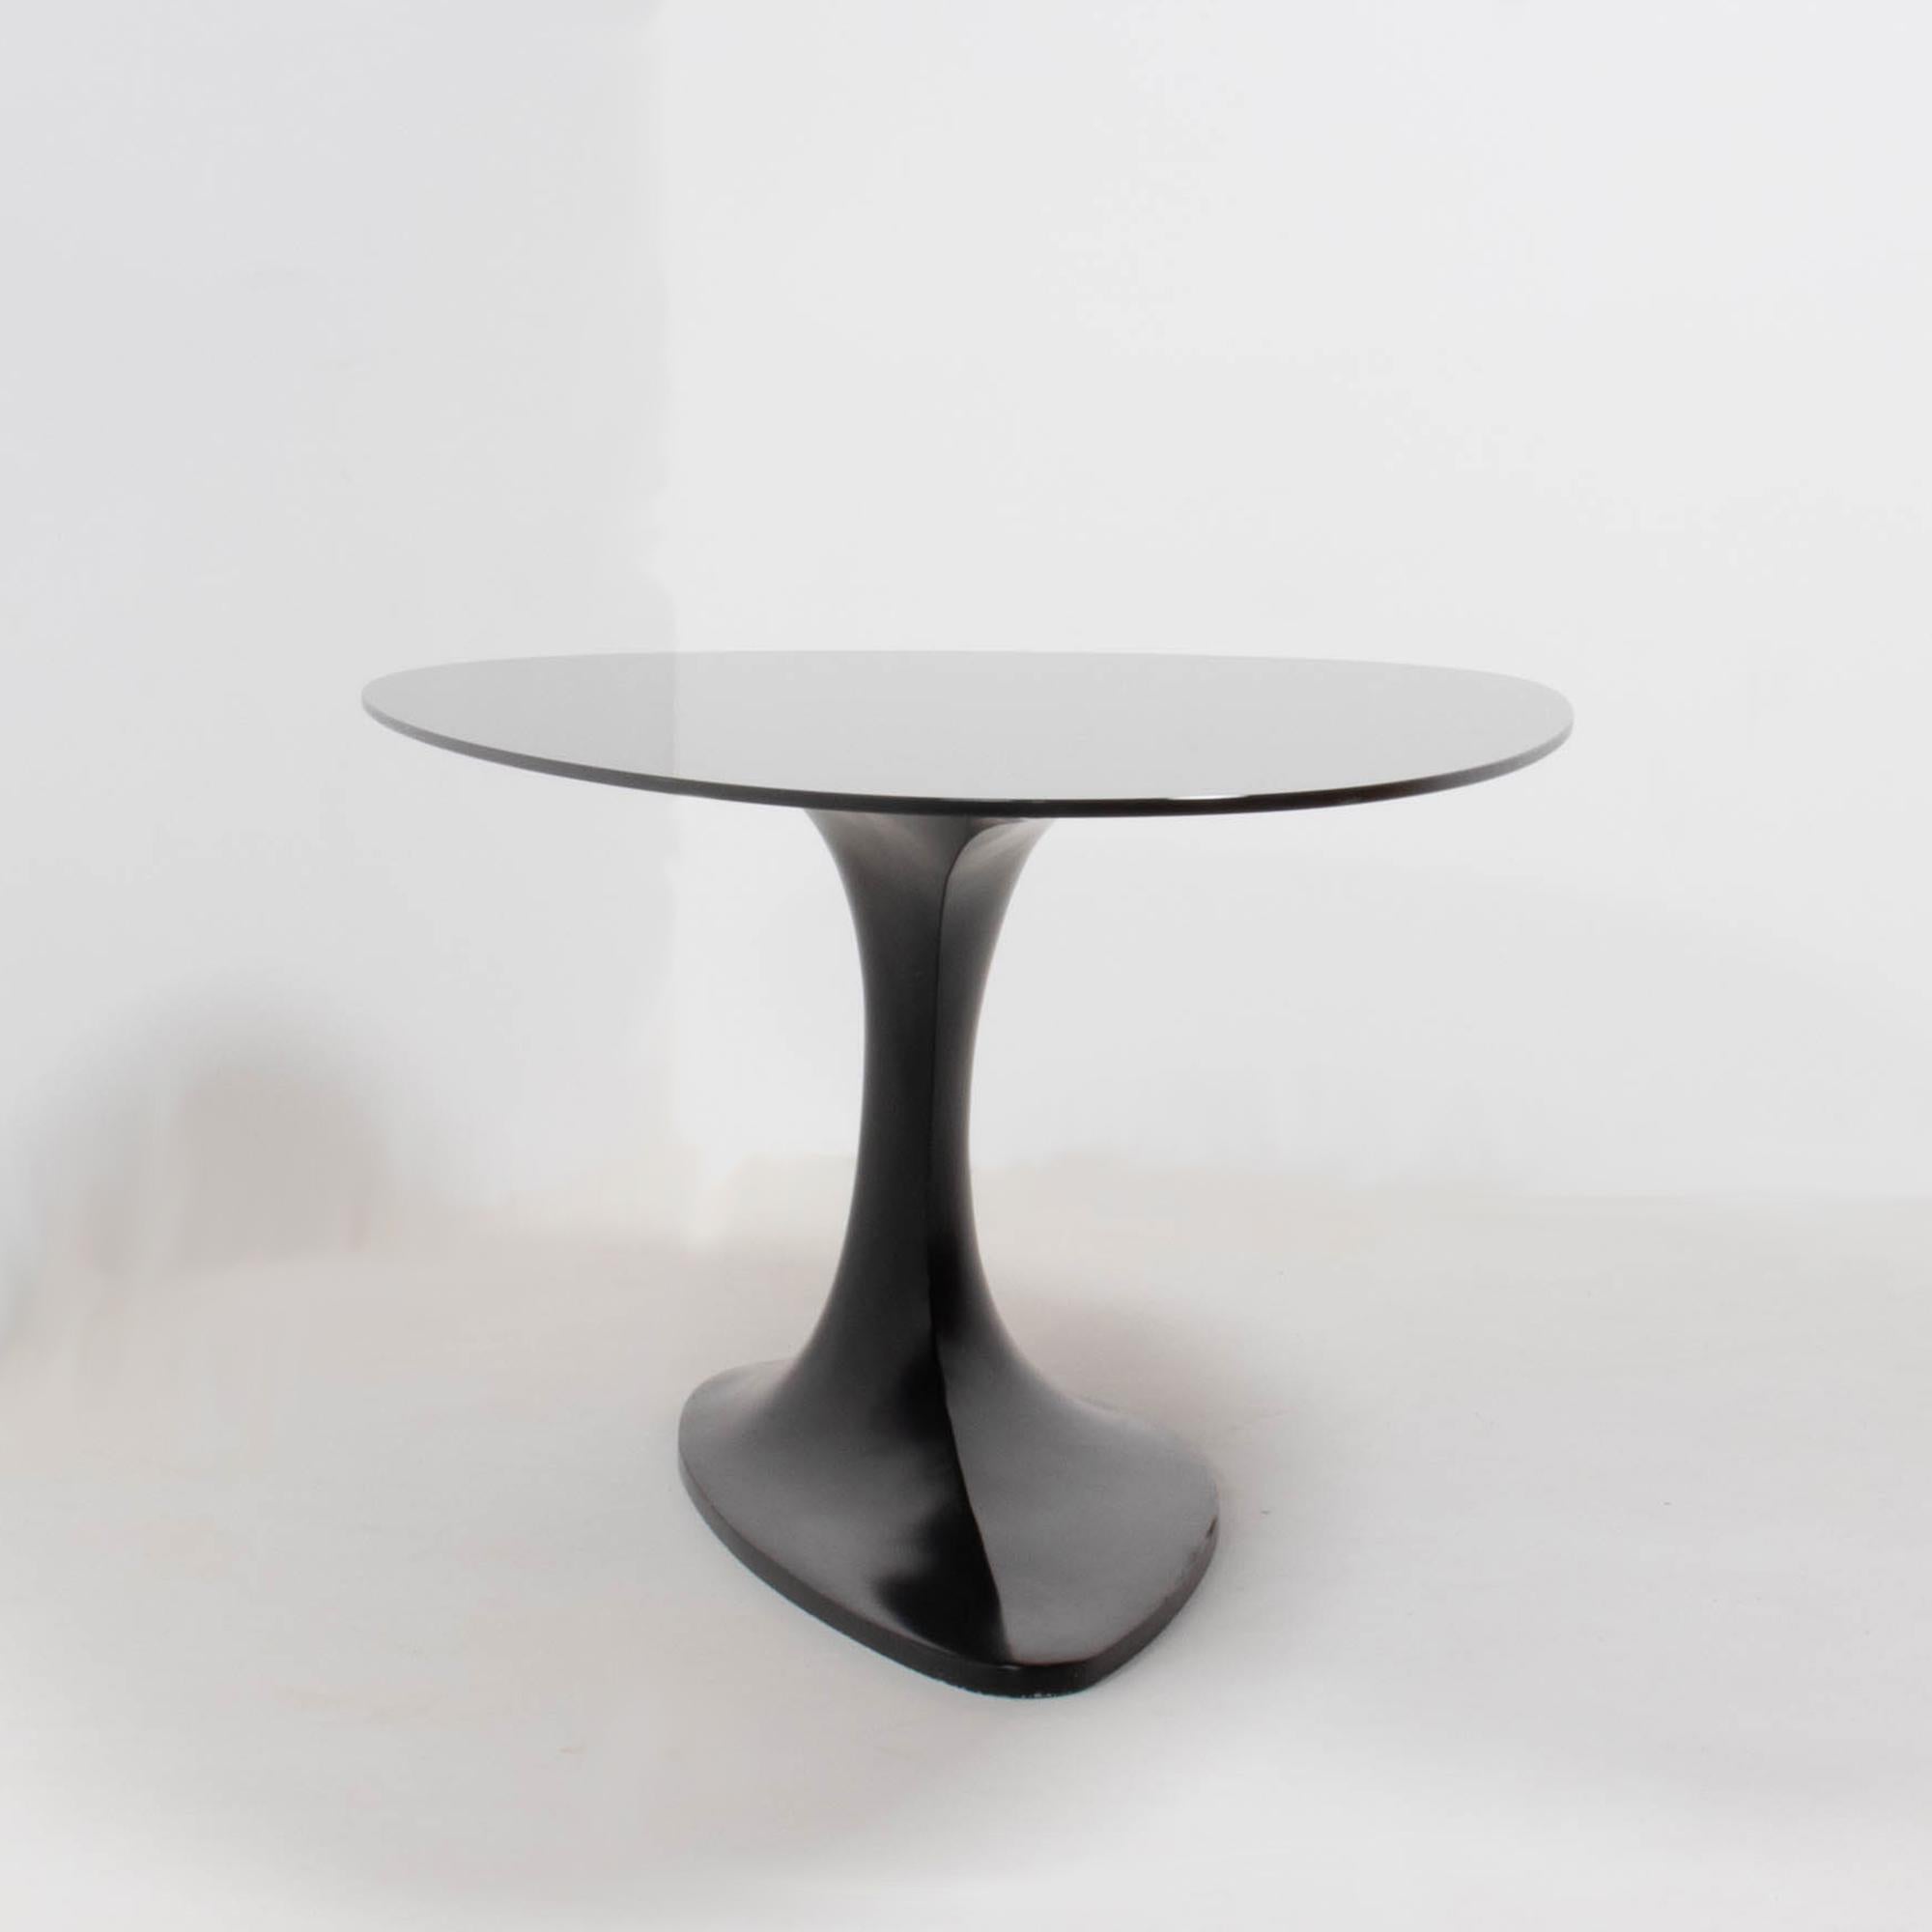 French Roche Bobois 'Speed Up' Black Dining Table by Sacha Lakic, 2005